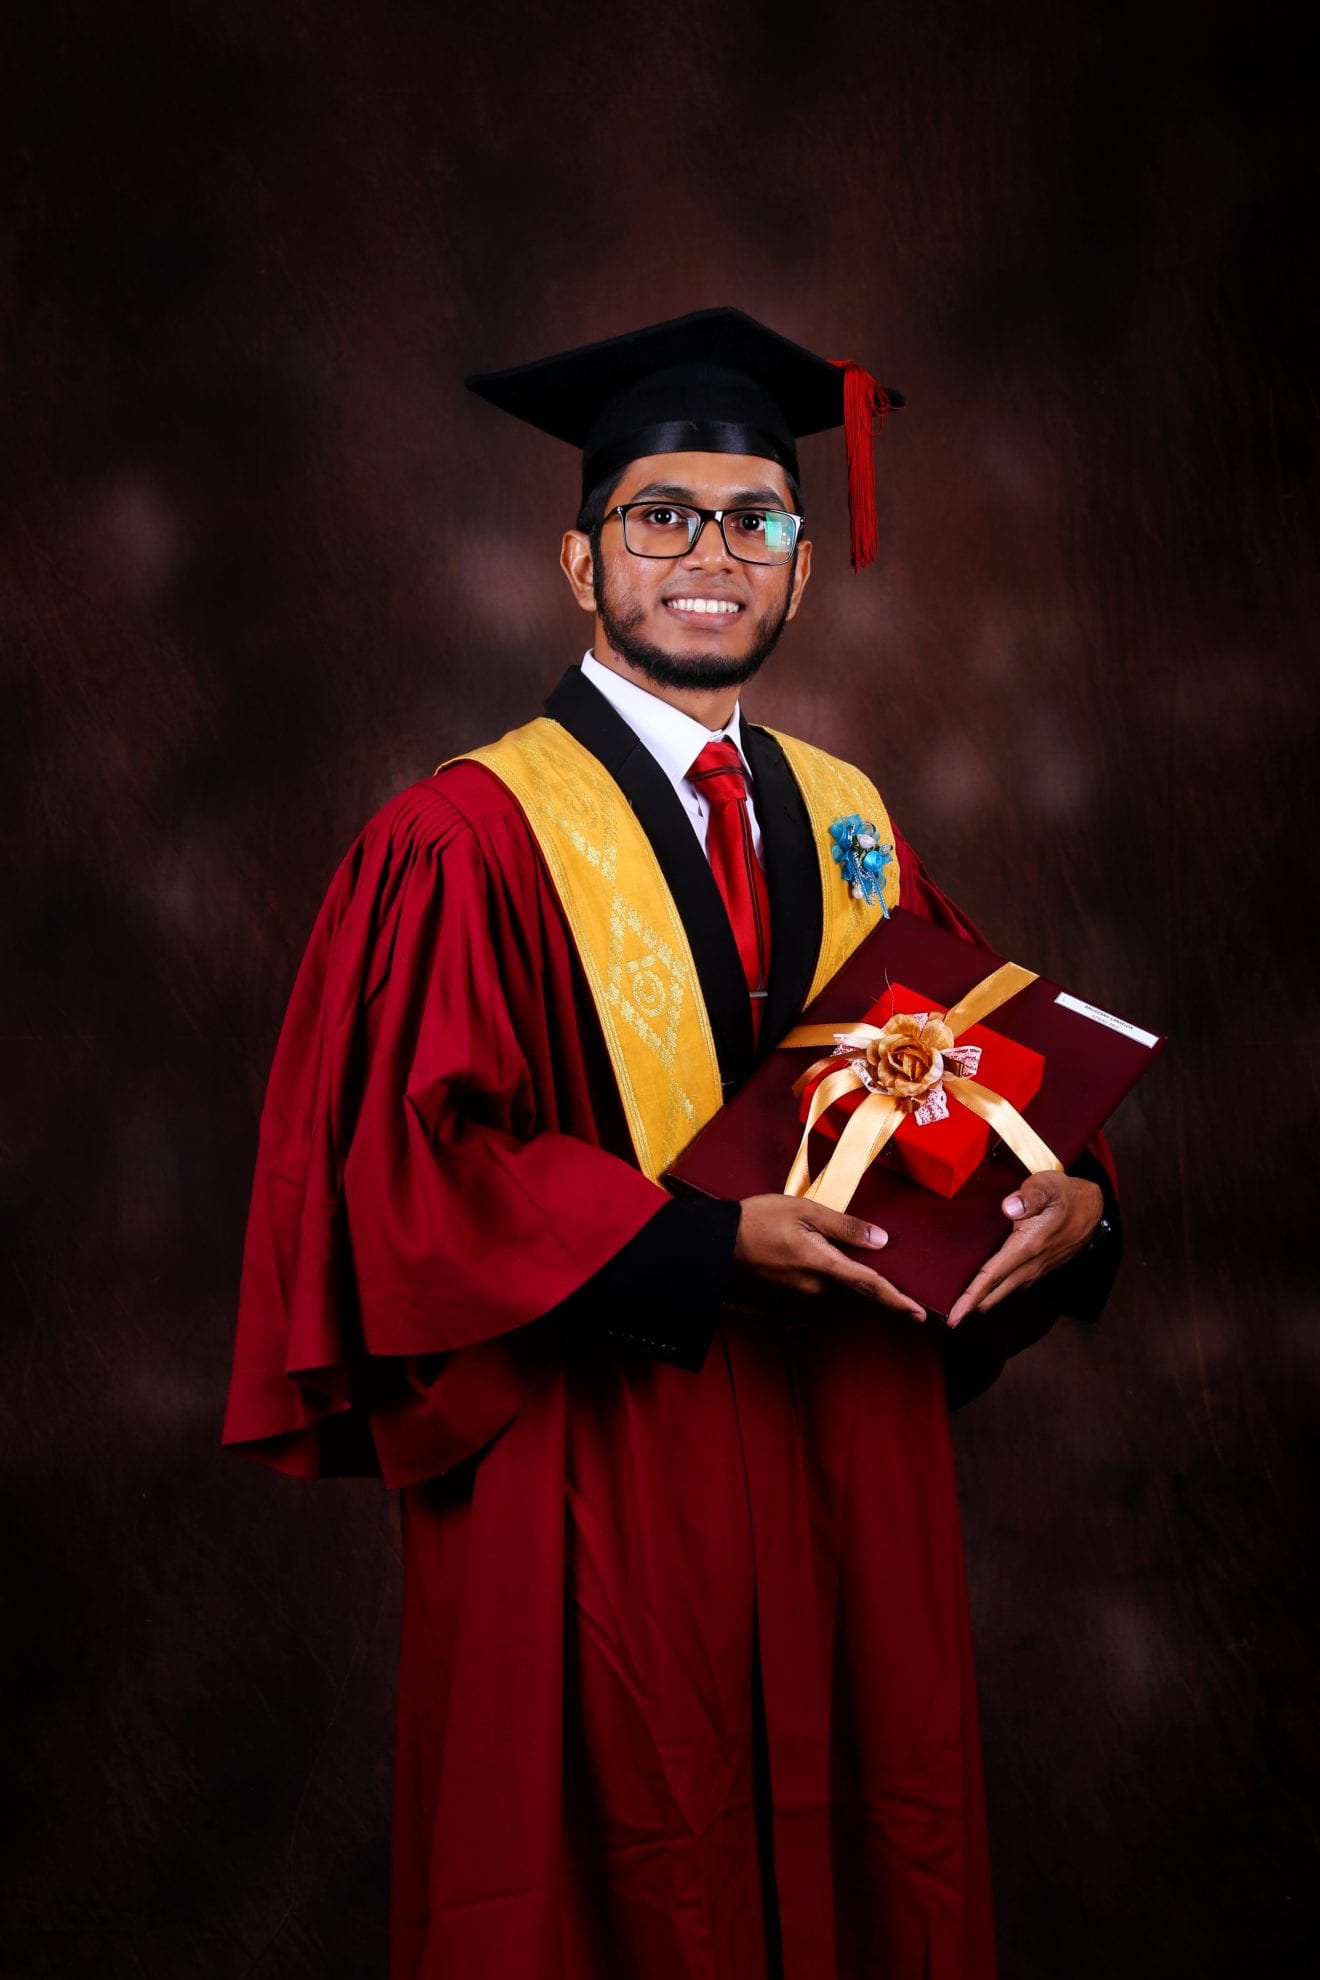 Chancellor's Award Winner, Azwad Abid, from School of Electrical Engineering